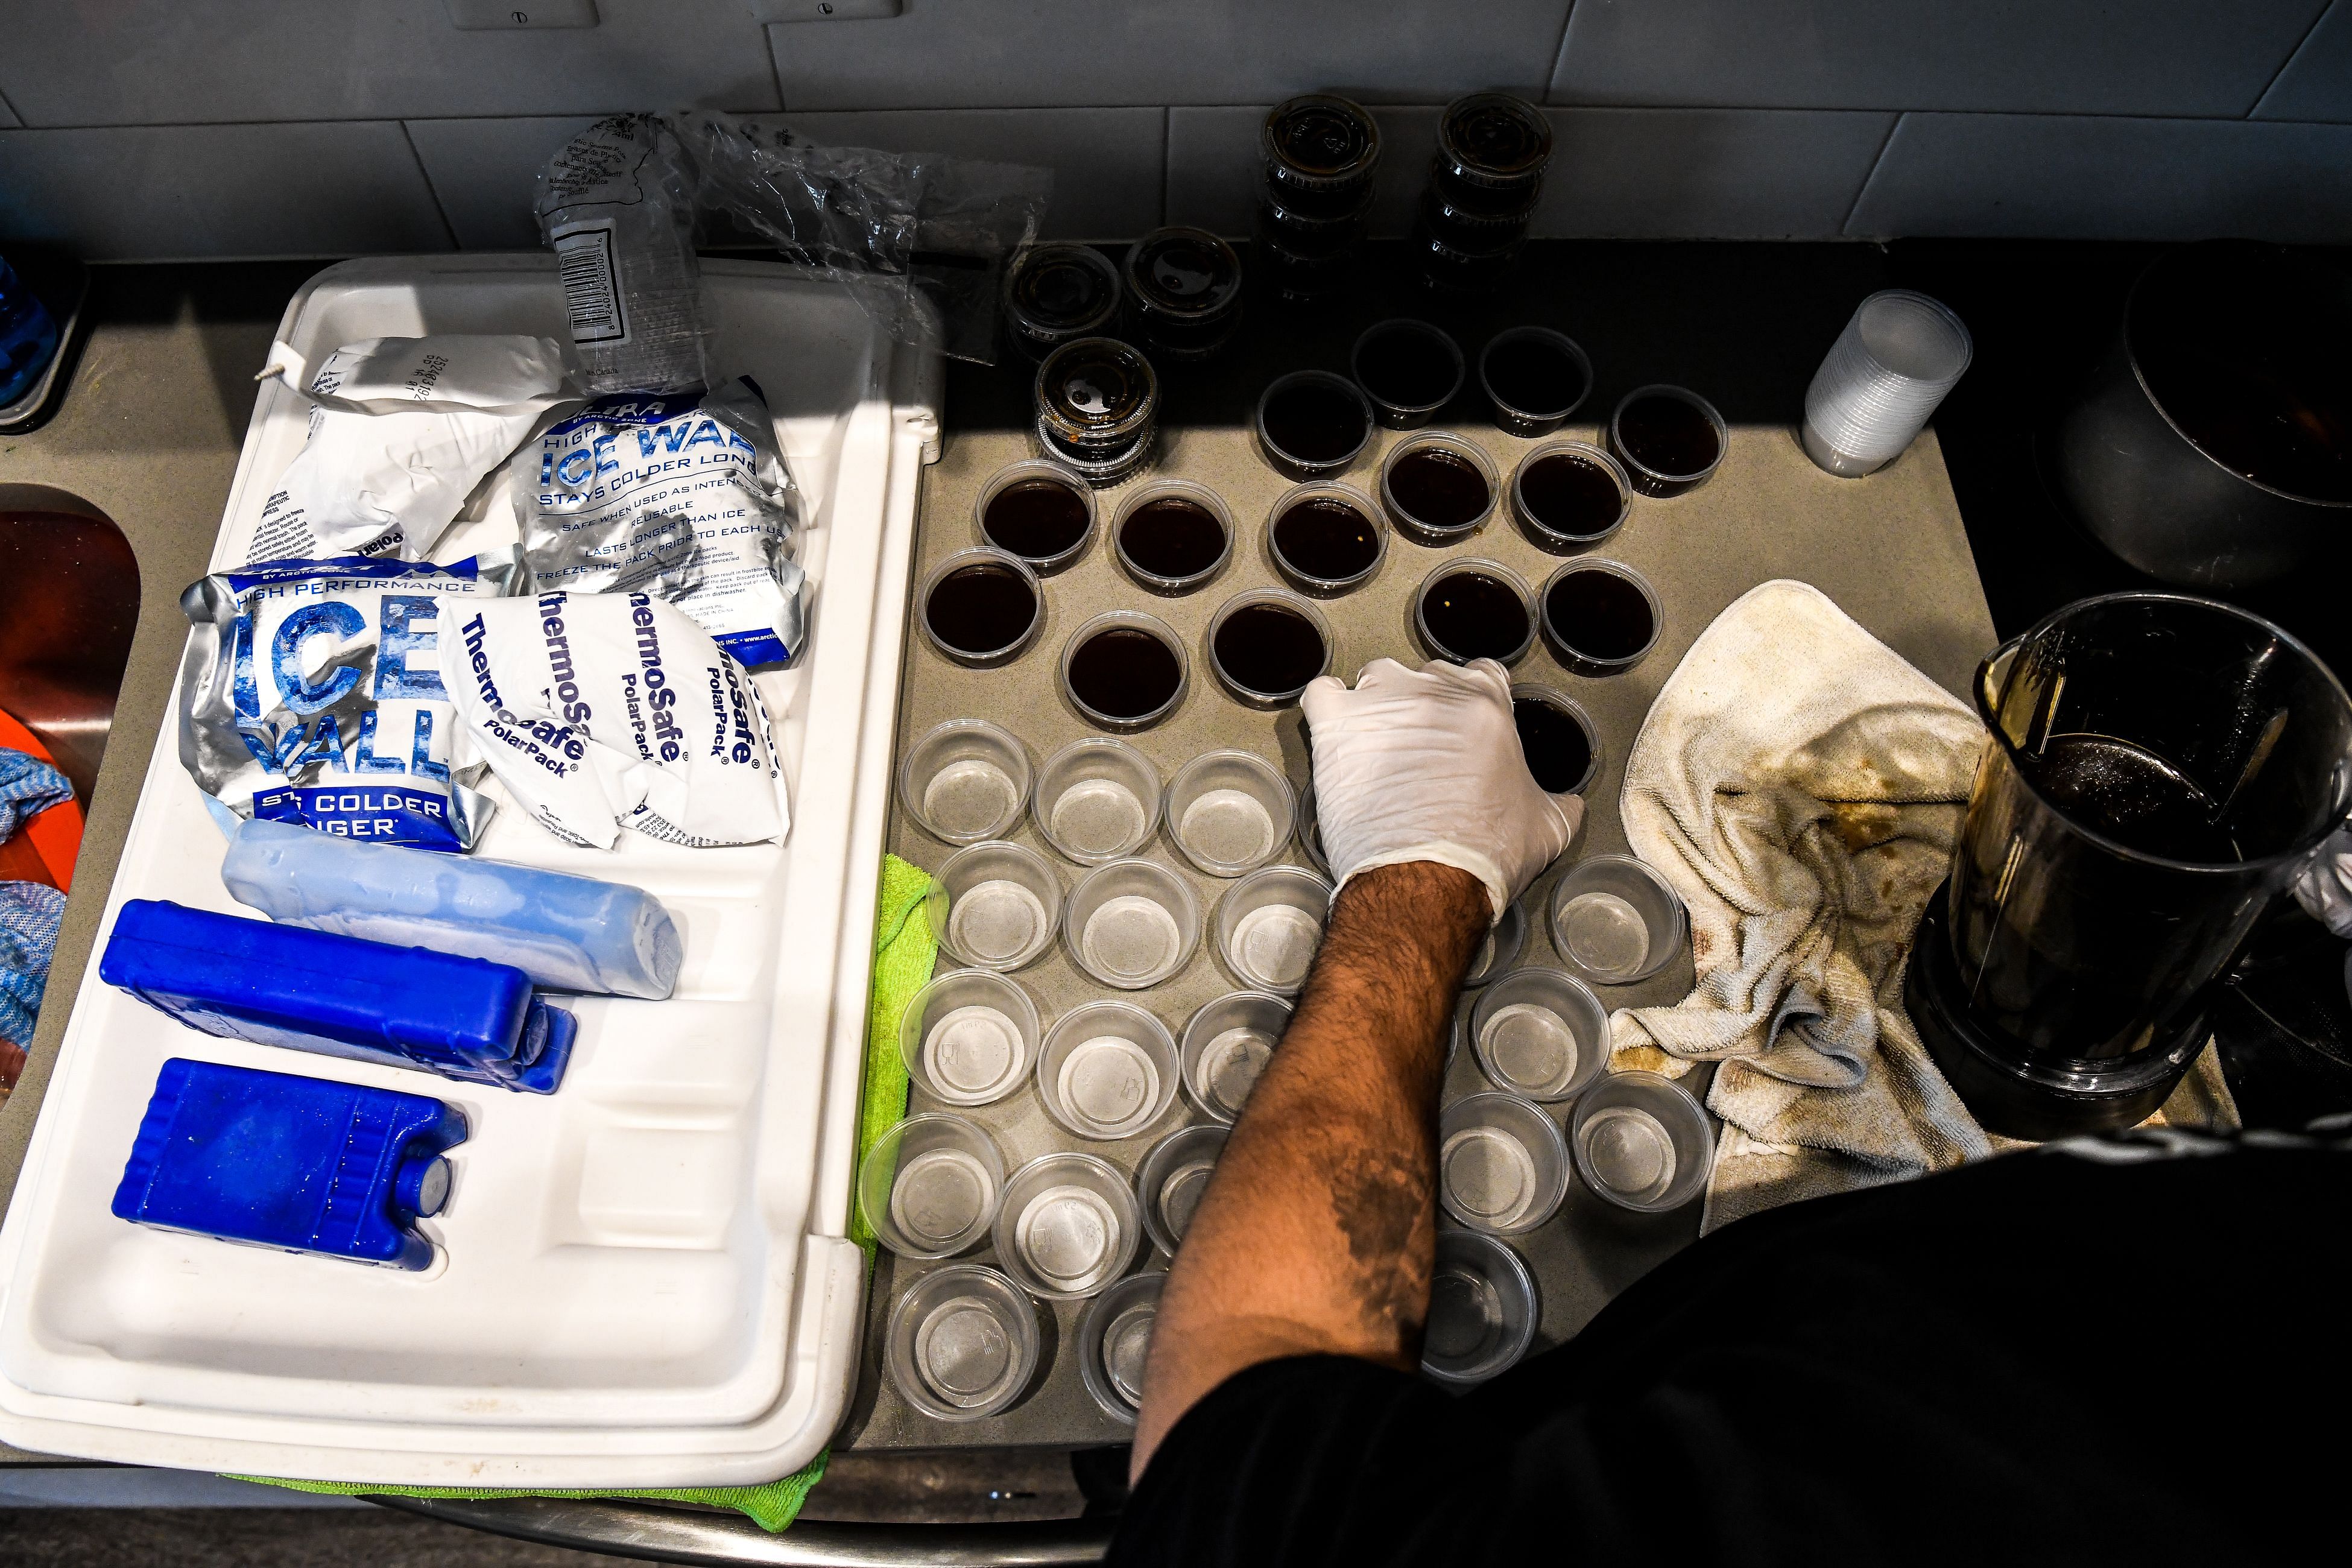 Rafael Delgado (29), who used to work as an Uber driver and recently found himself unemployed, prepares containers of dipping sauce to serve with homemade tequenos, a popular Venezuelan snack, inside his home in Miami. (AFP)